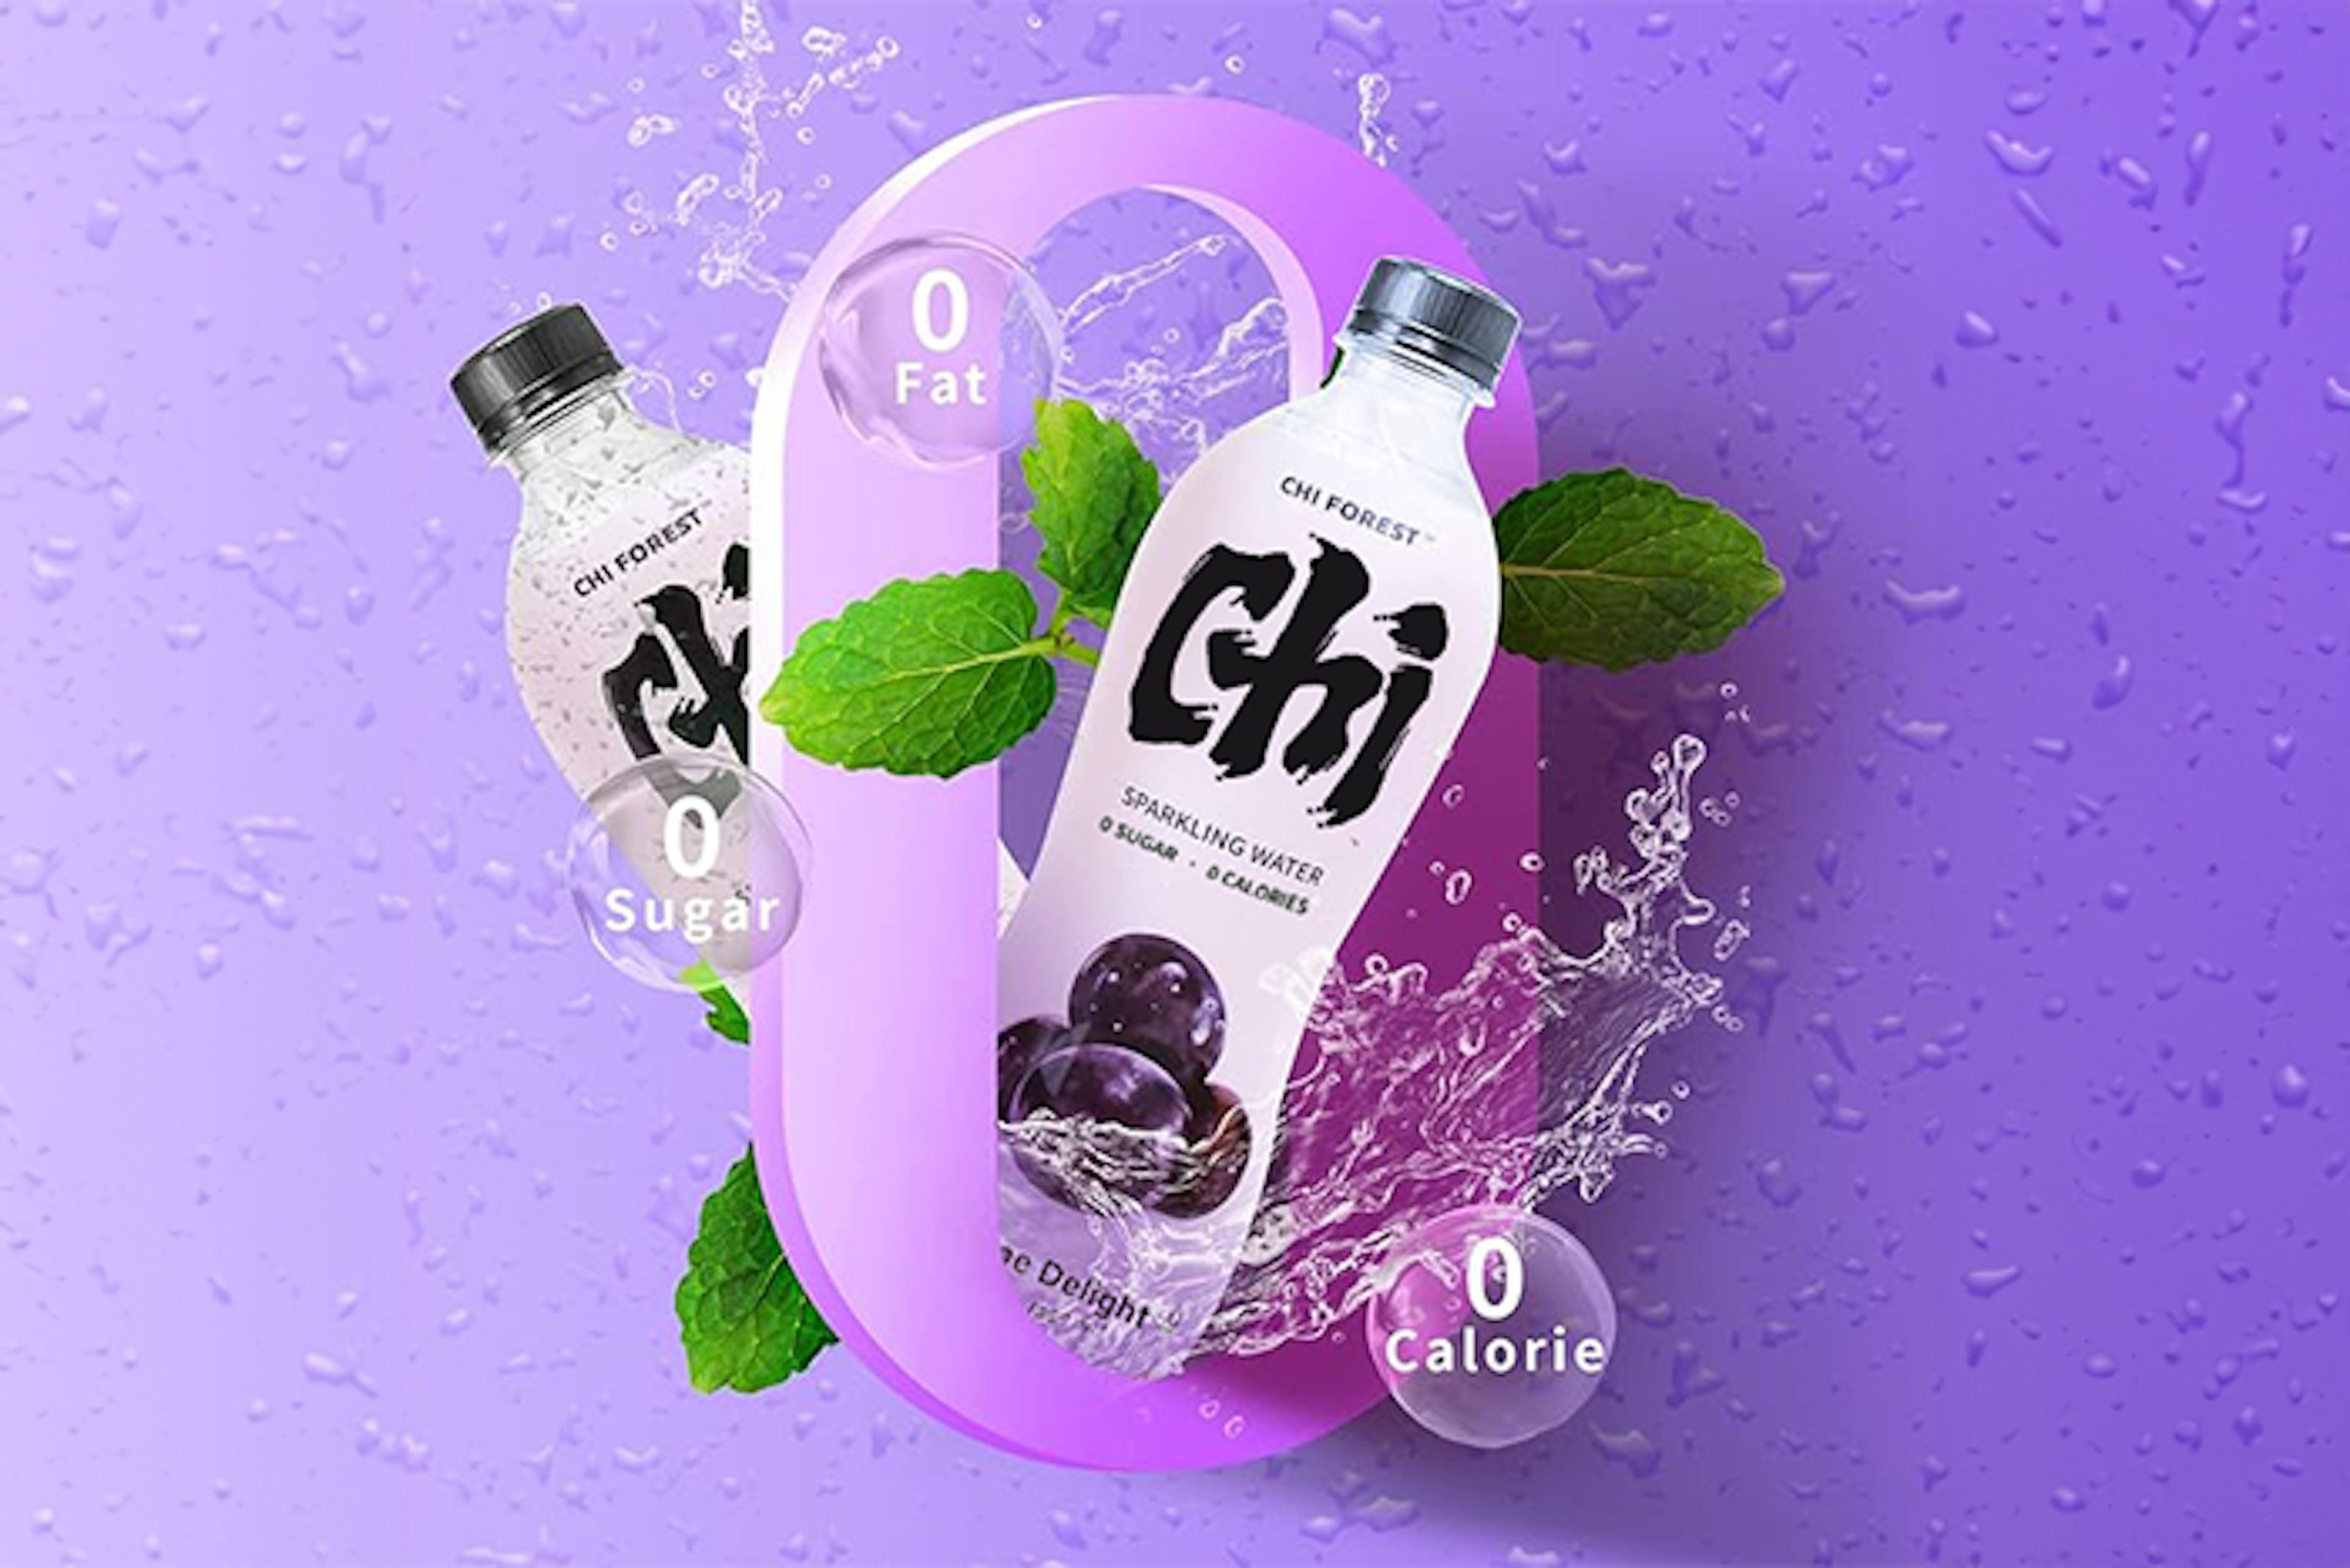 Genki Forest sparkling water grapes 480ml